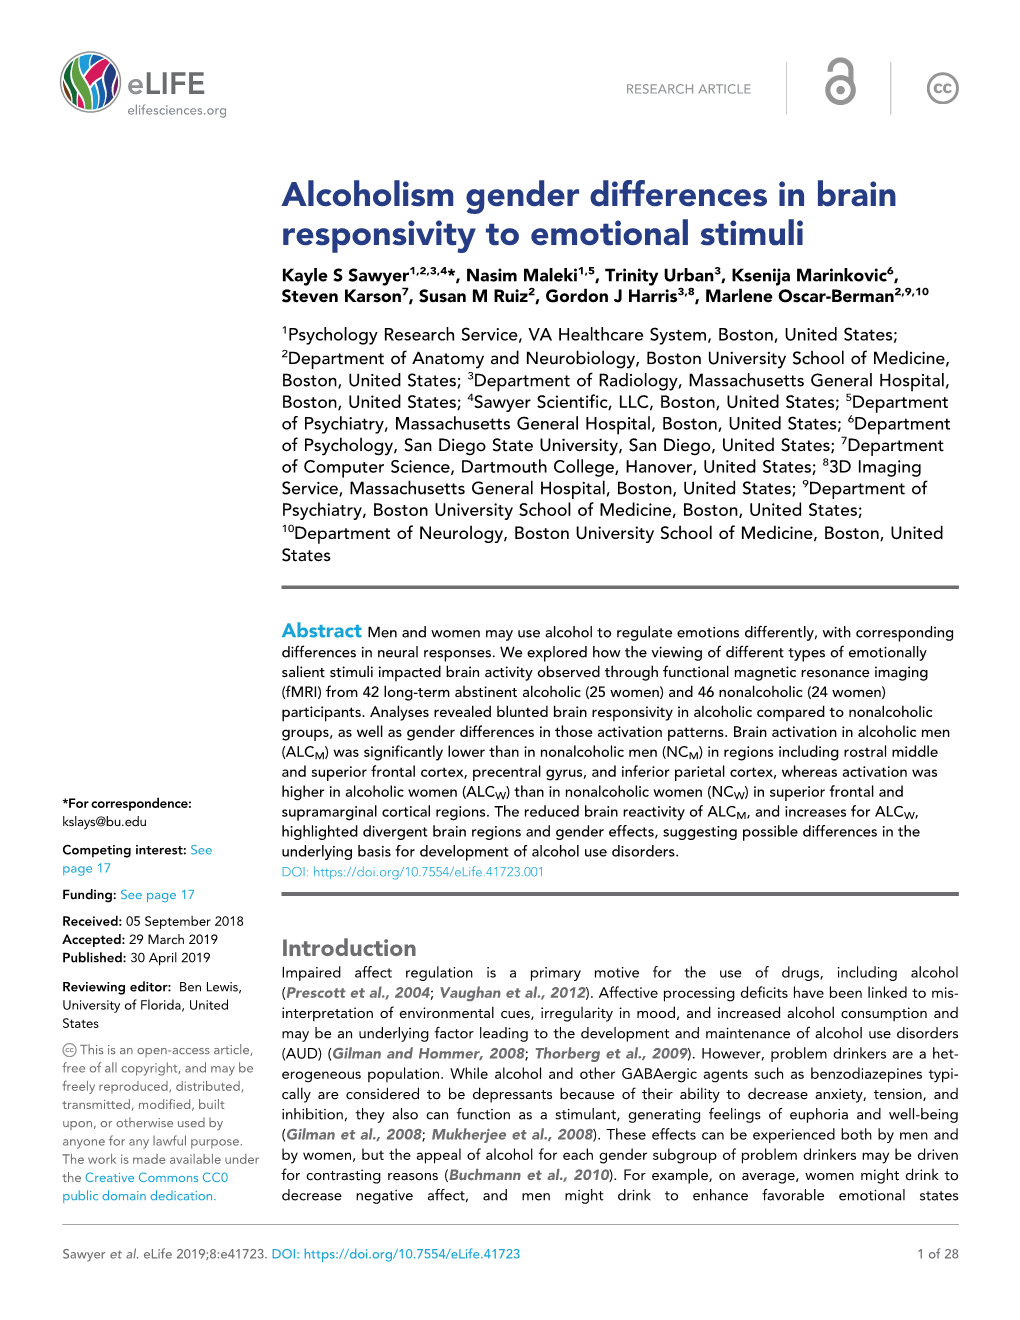 Alcoholism Gender Differences in Brain Responsivity to Emotional Stimuli